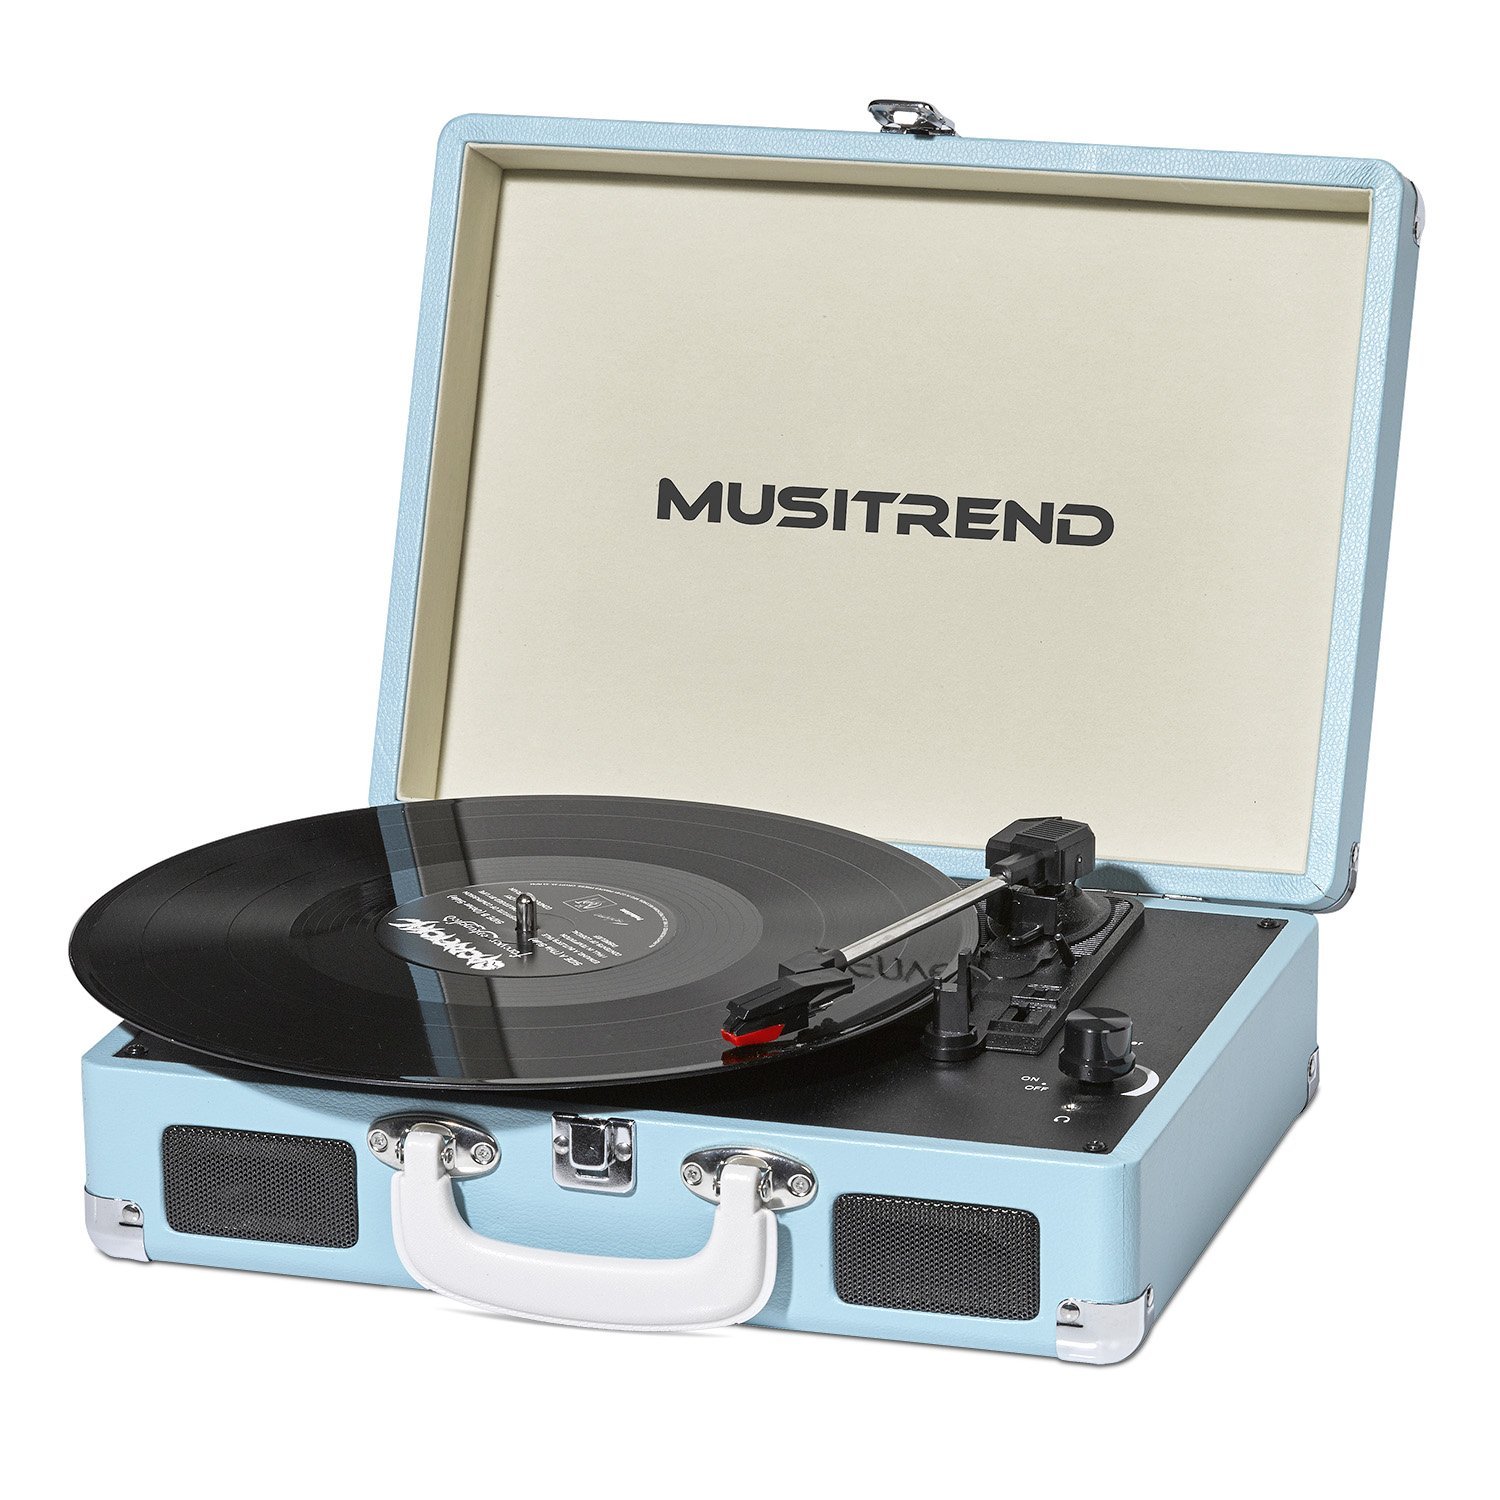 Prime Day Deal – Classic Record Player Portable Suitcase 3 Speed – Just $45.59!